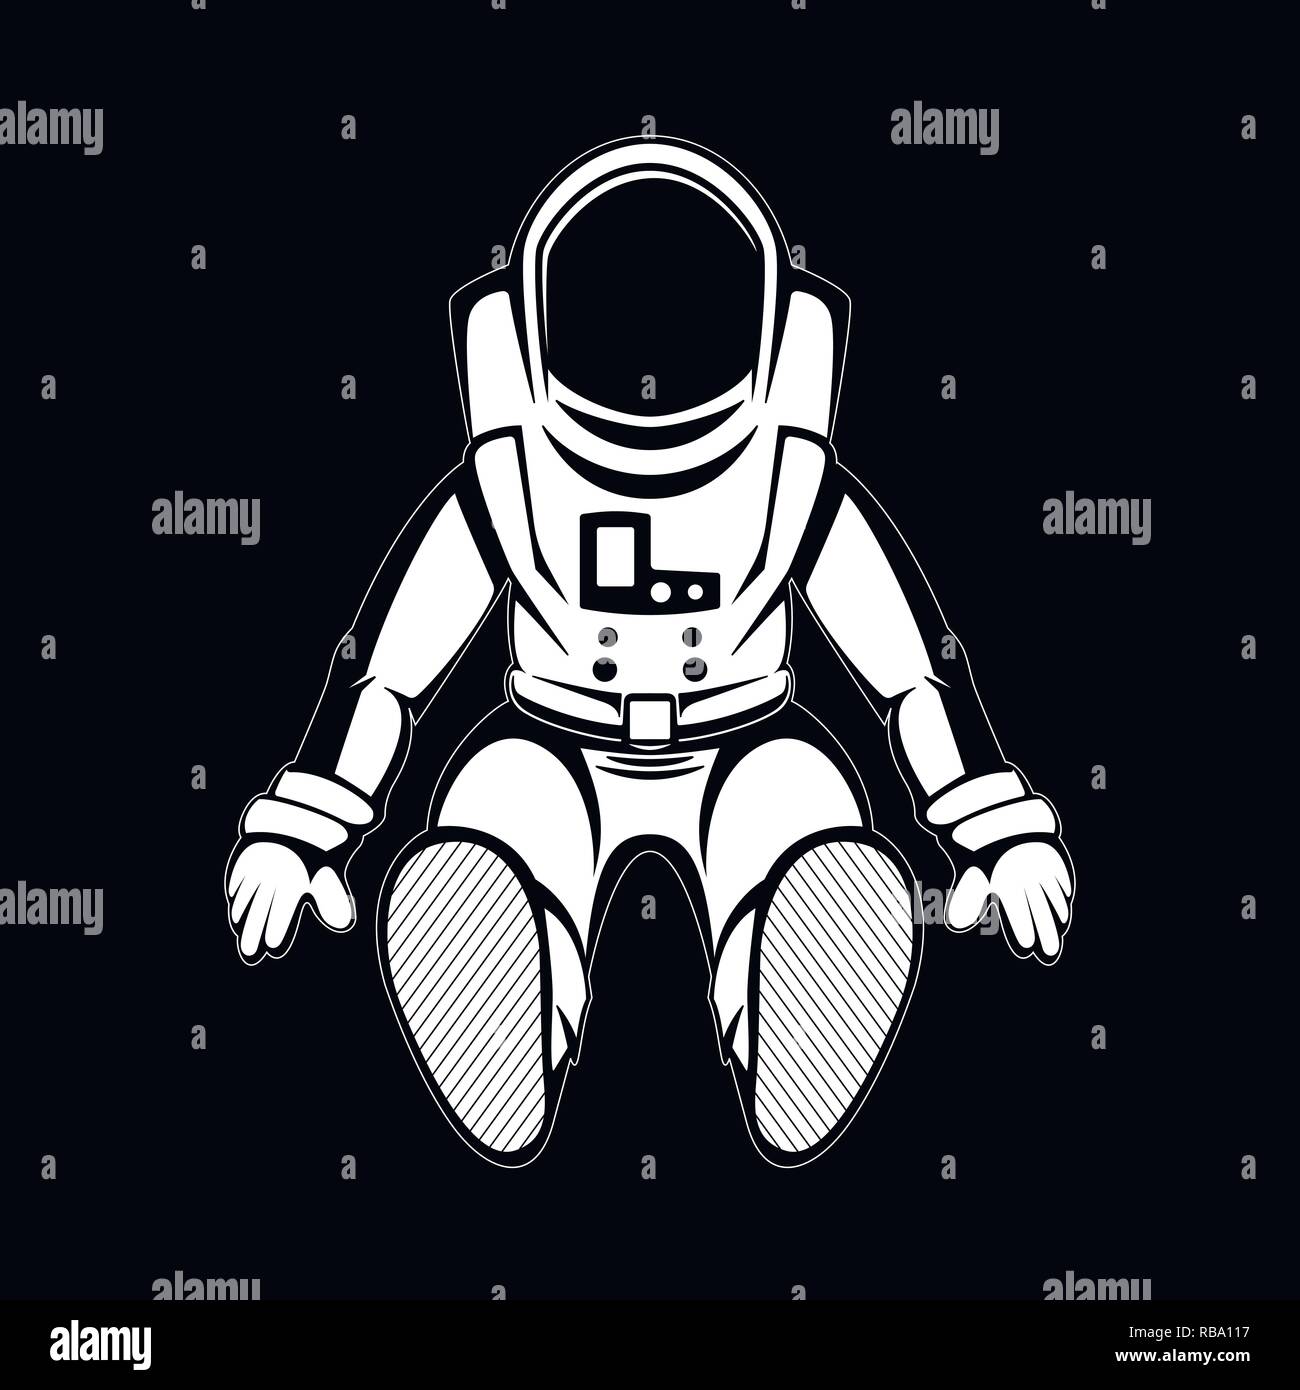 astronaut, standing spaceman isolated on black background Stock Photo -  Alamy